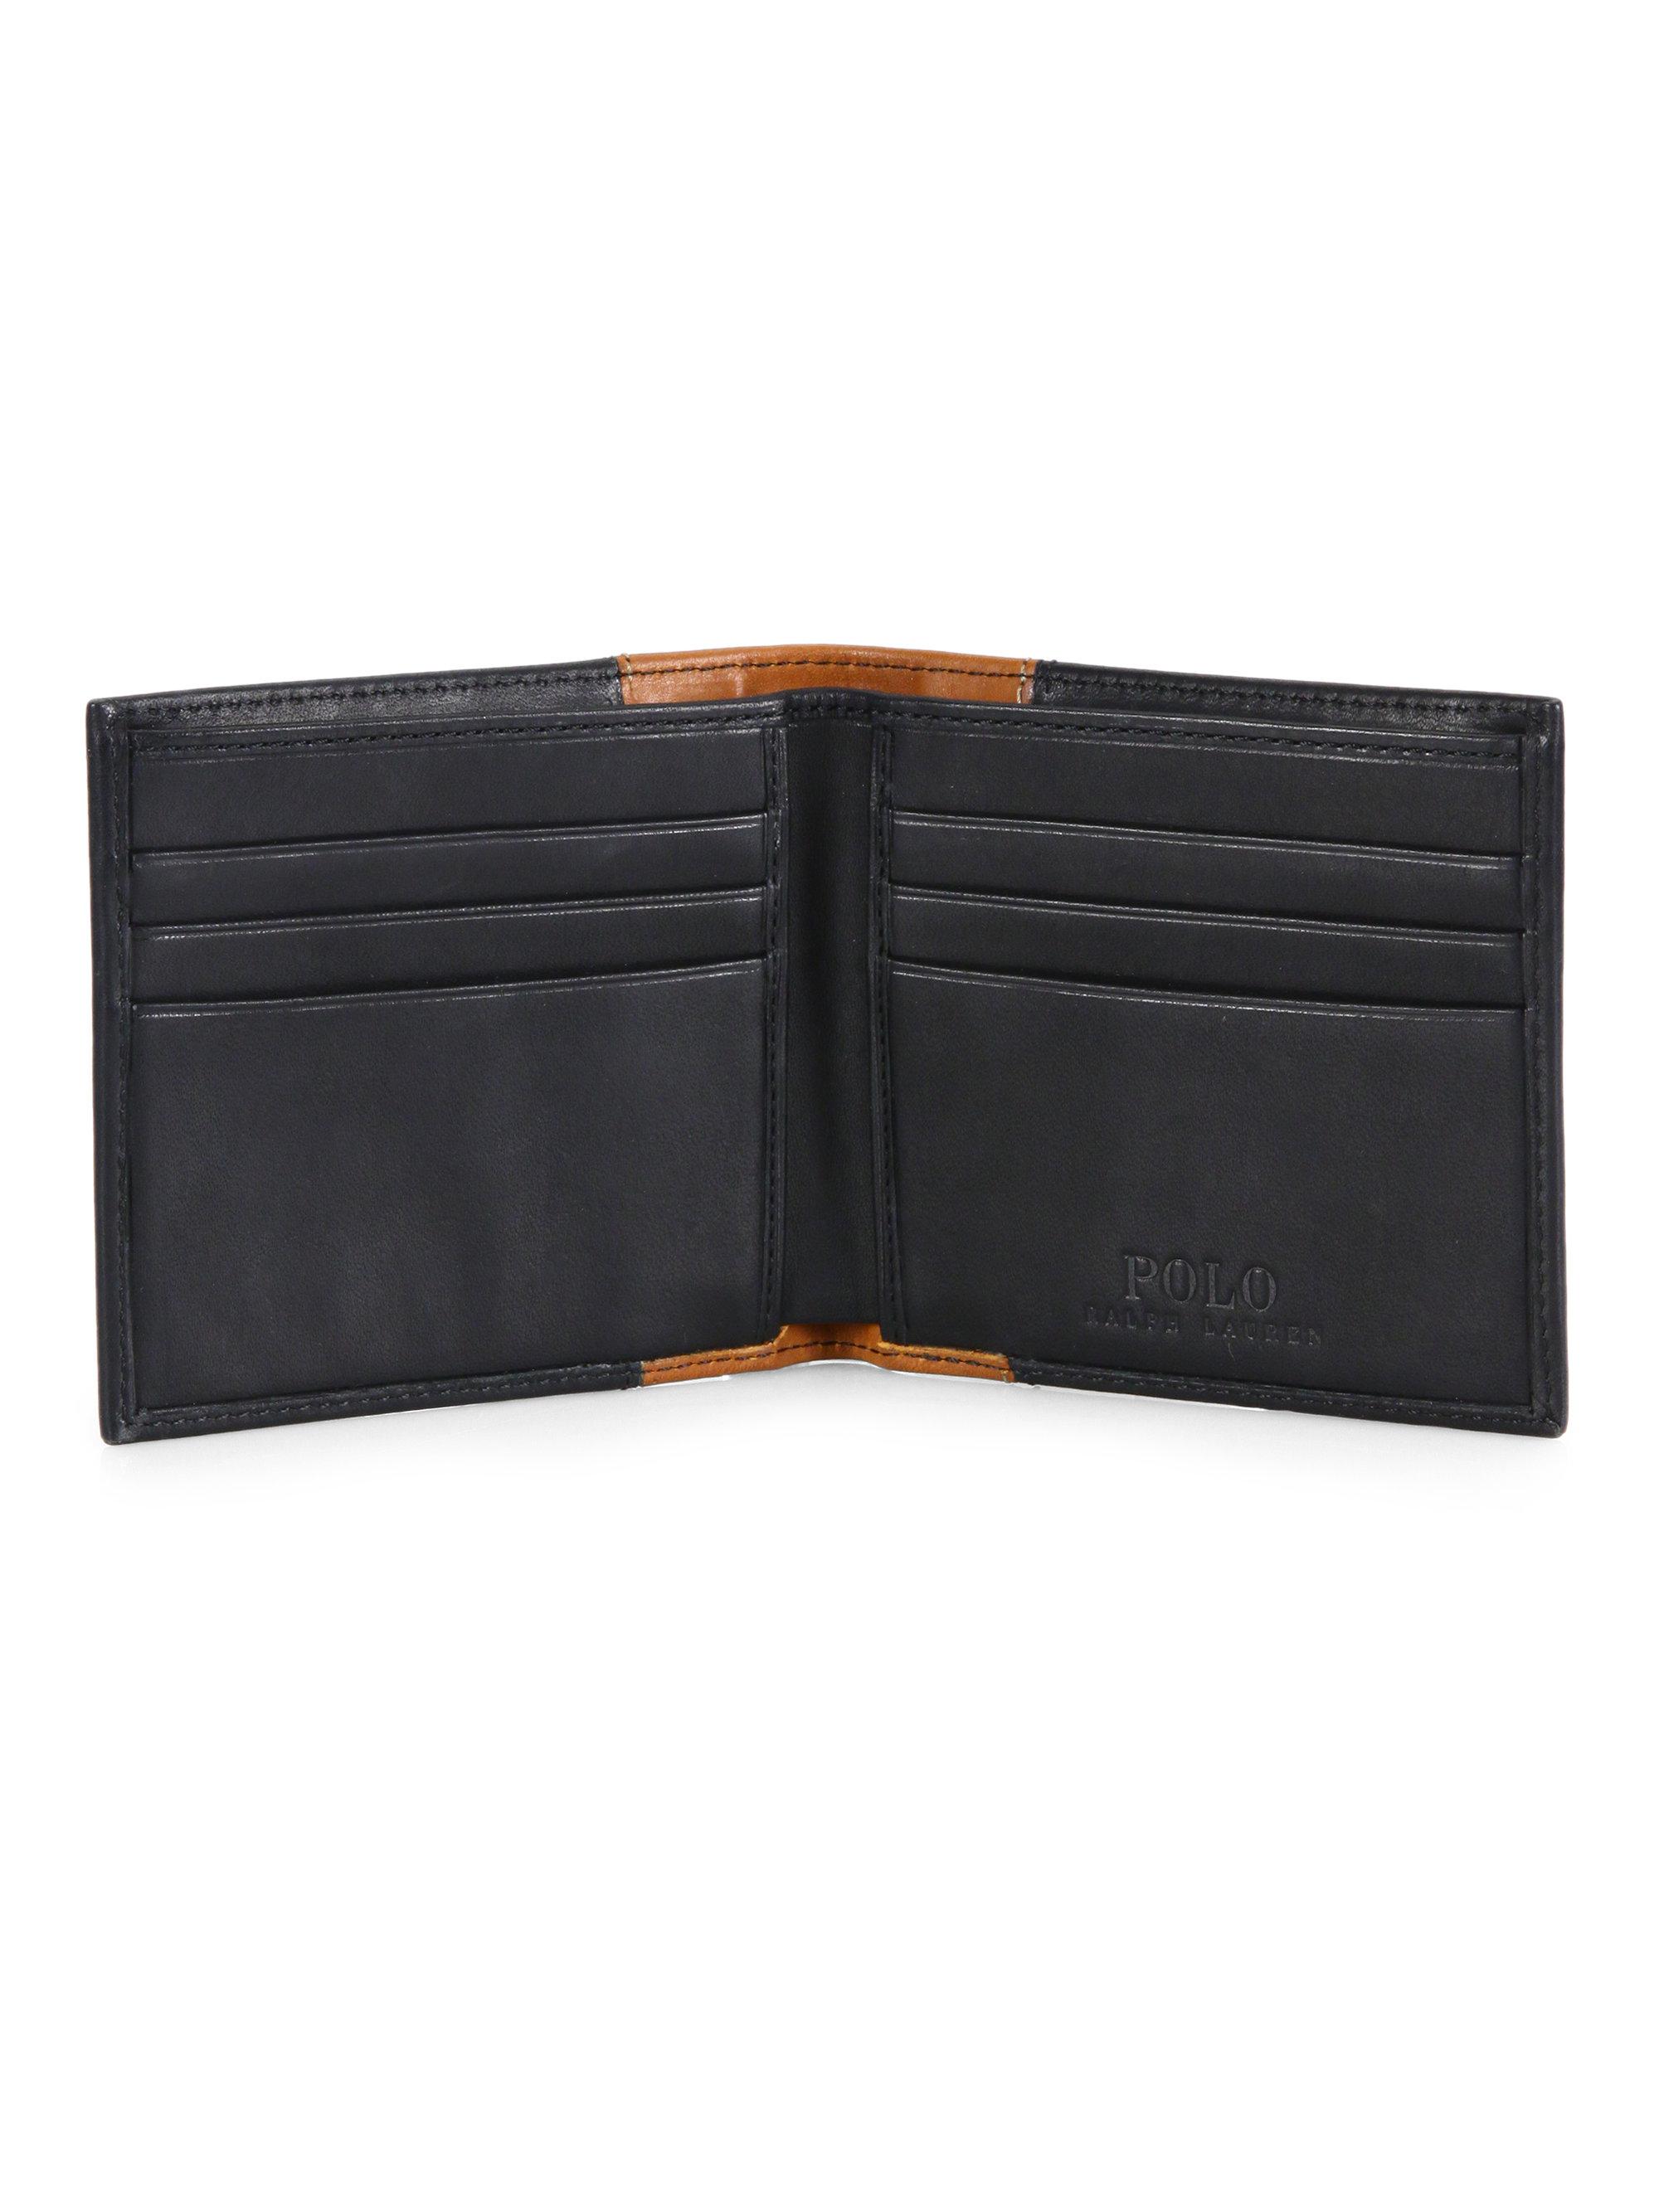 Polo Ralph Lauren Two-tone Leather Wallet in Black for Men - Lyst